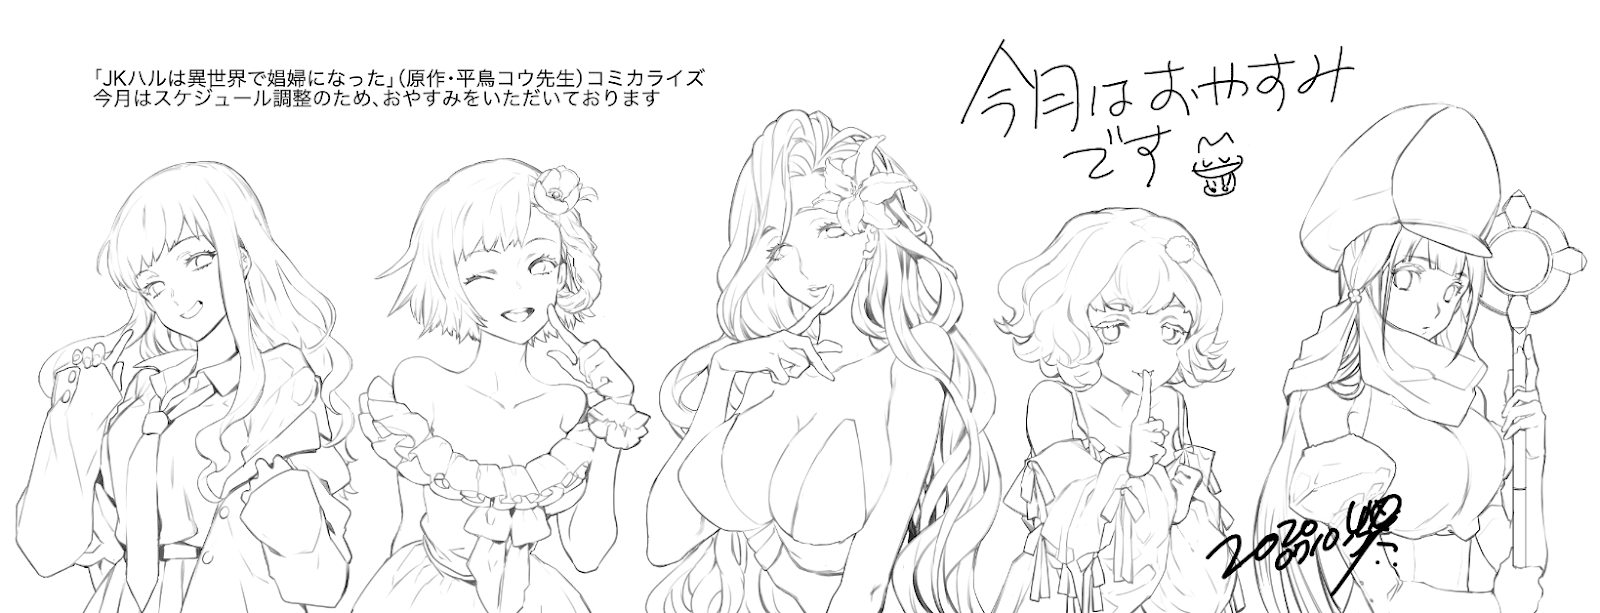 Sketches of the female cast from JK Haru.